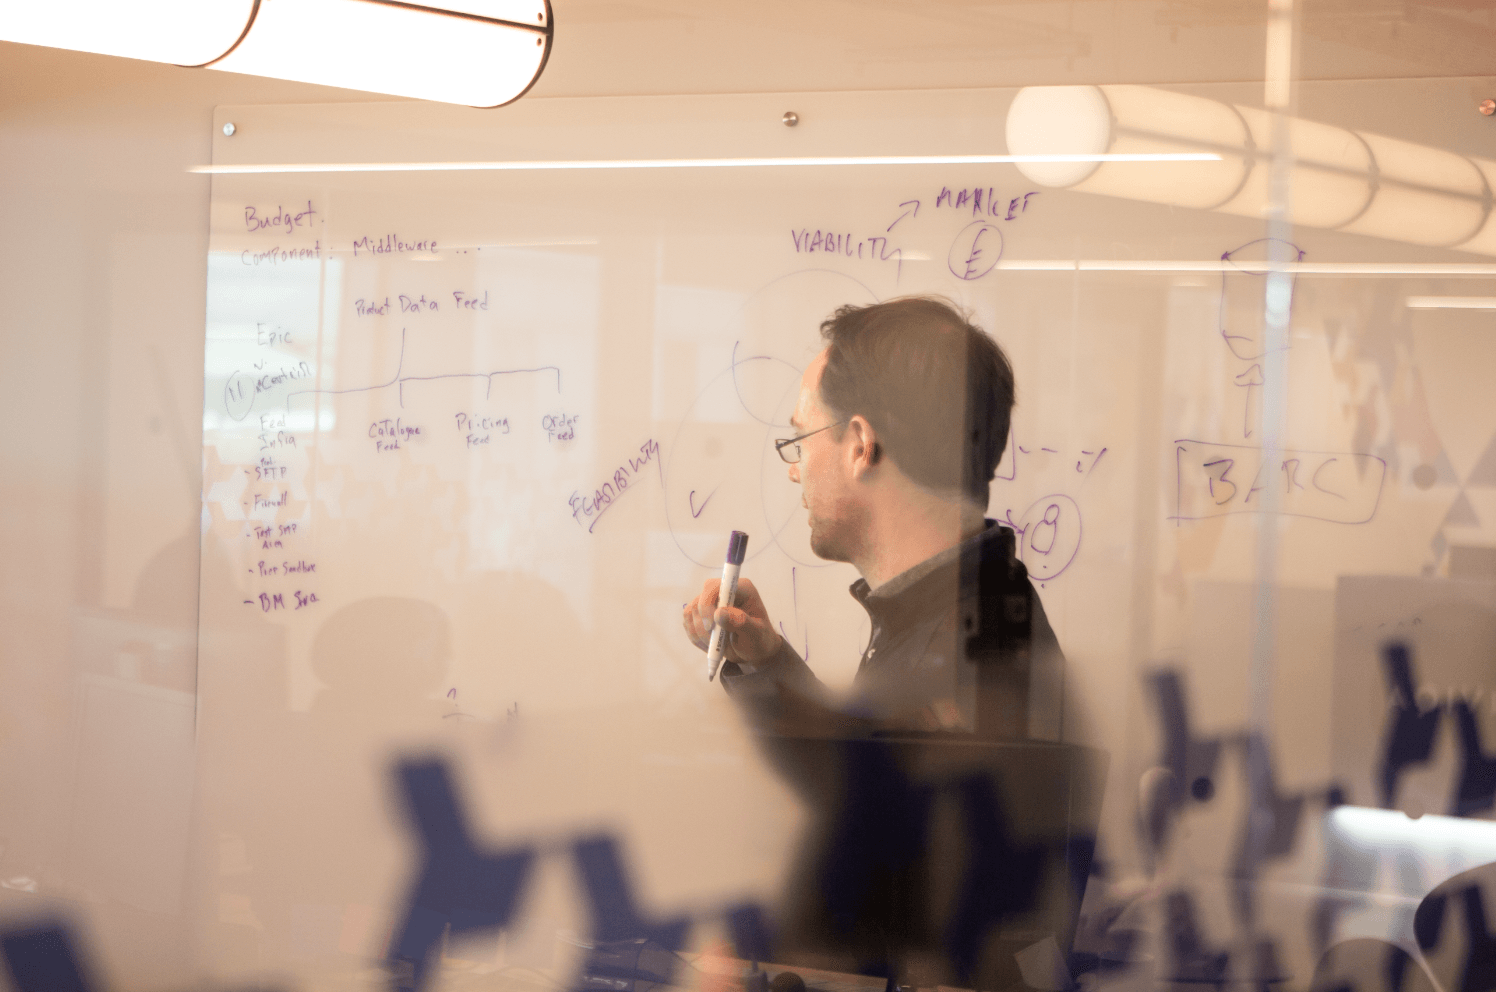 A fly-on-the-wall image of an Inviqa expert writing on a whiteboard in a meeting room